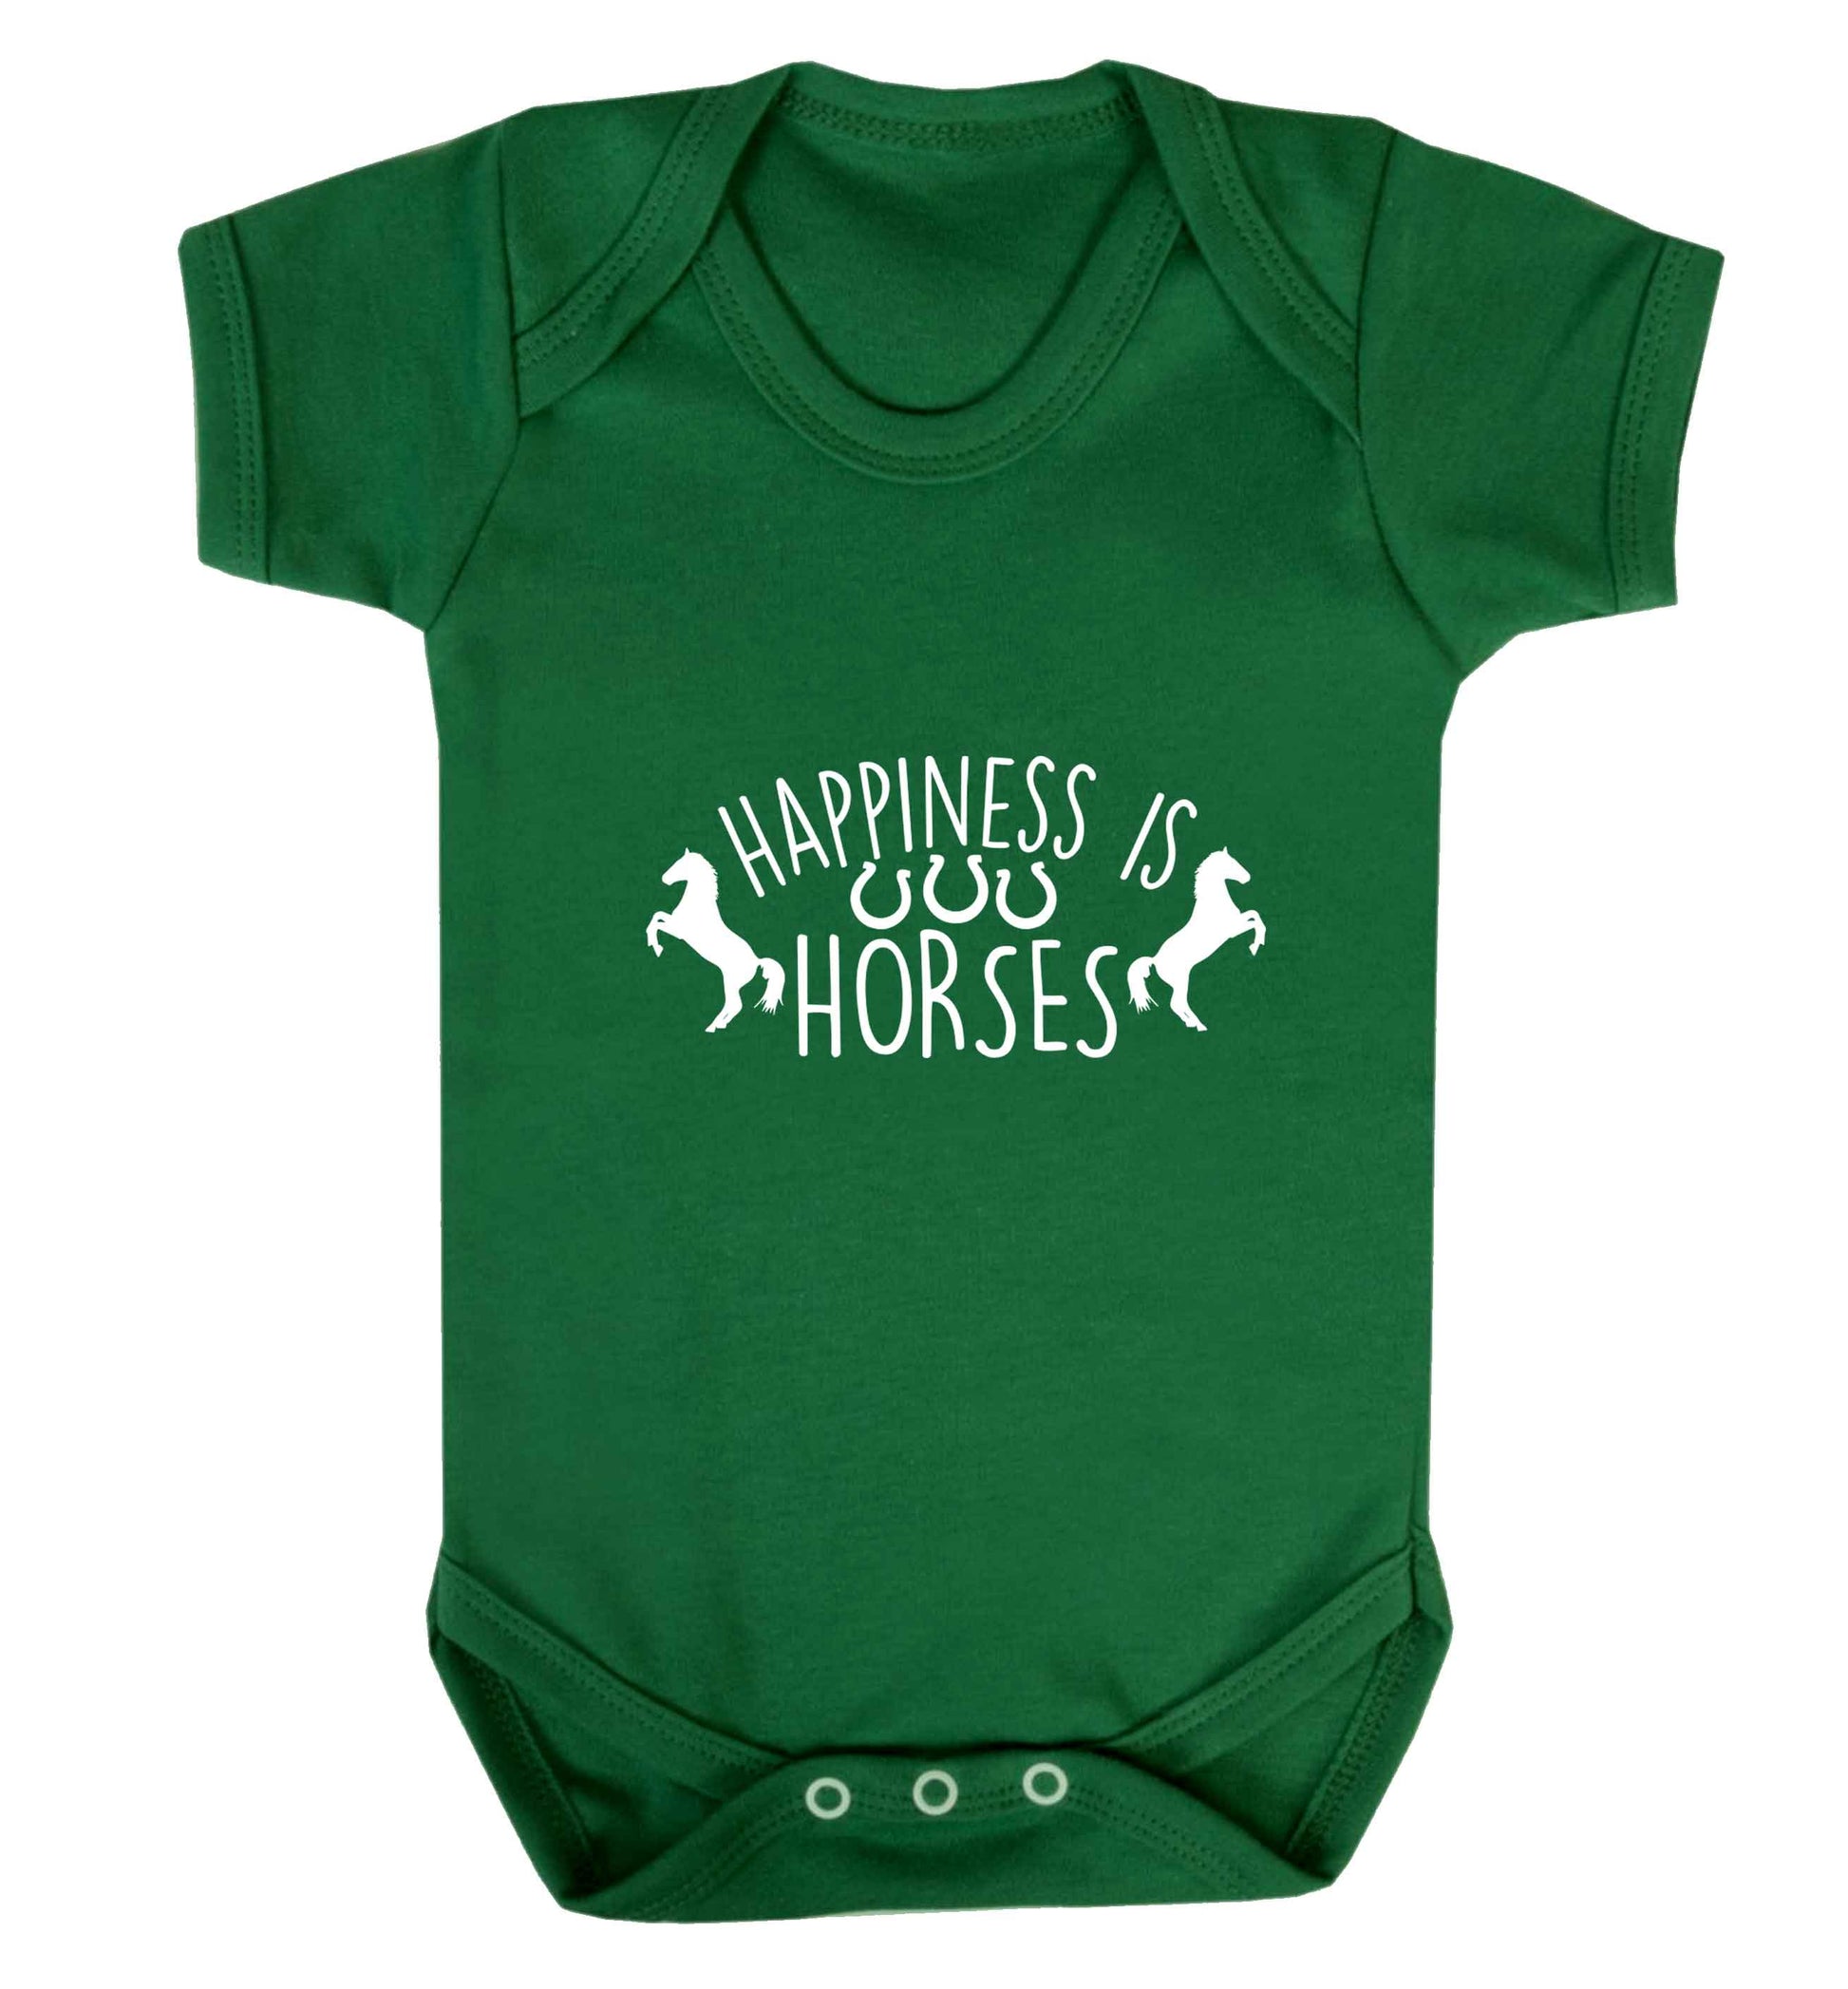 Happiness is horses baby vest green 18-24 months